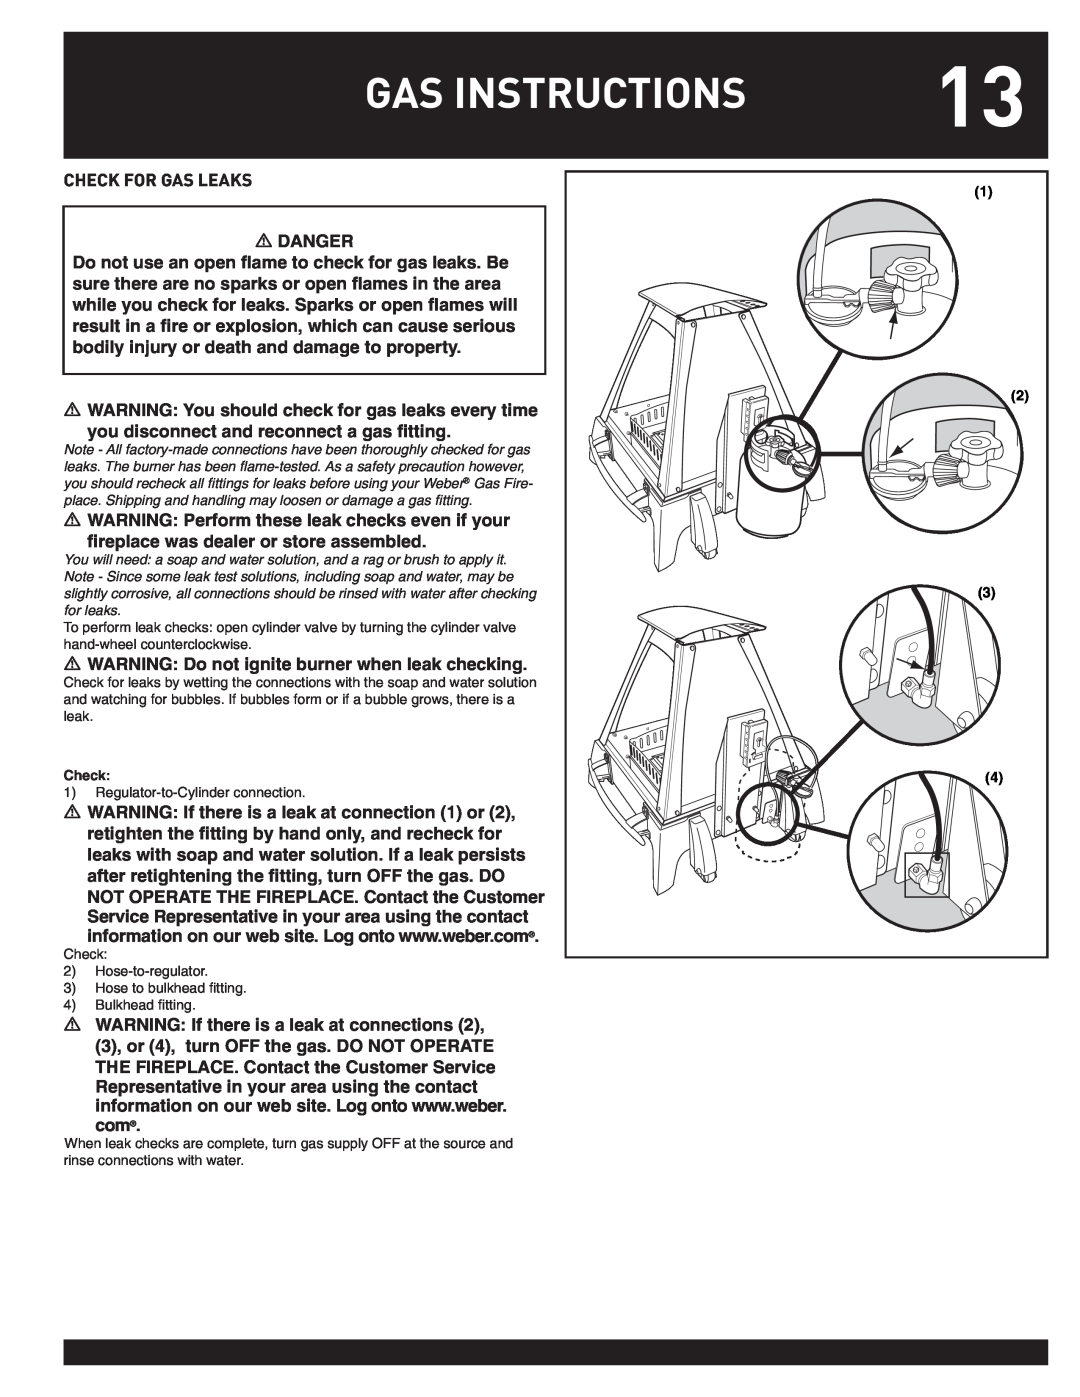 Weber #43028 manual Gas Instructions, Check For Gas Leaks 